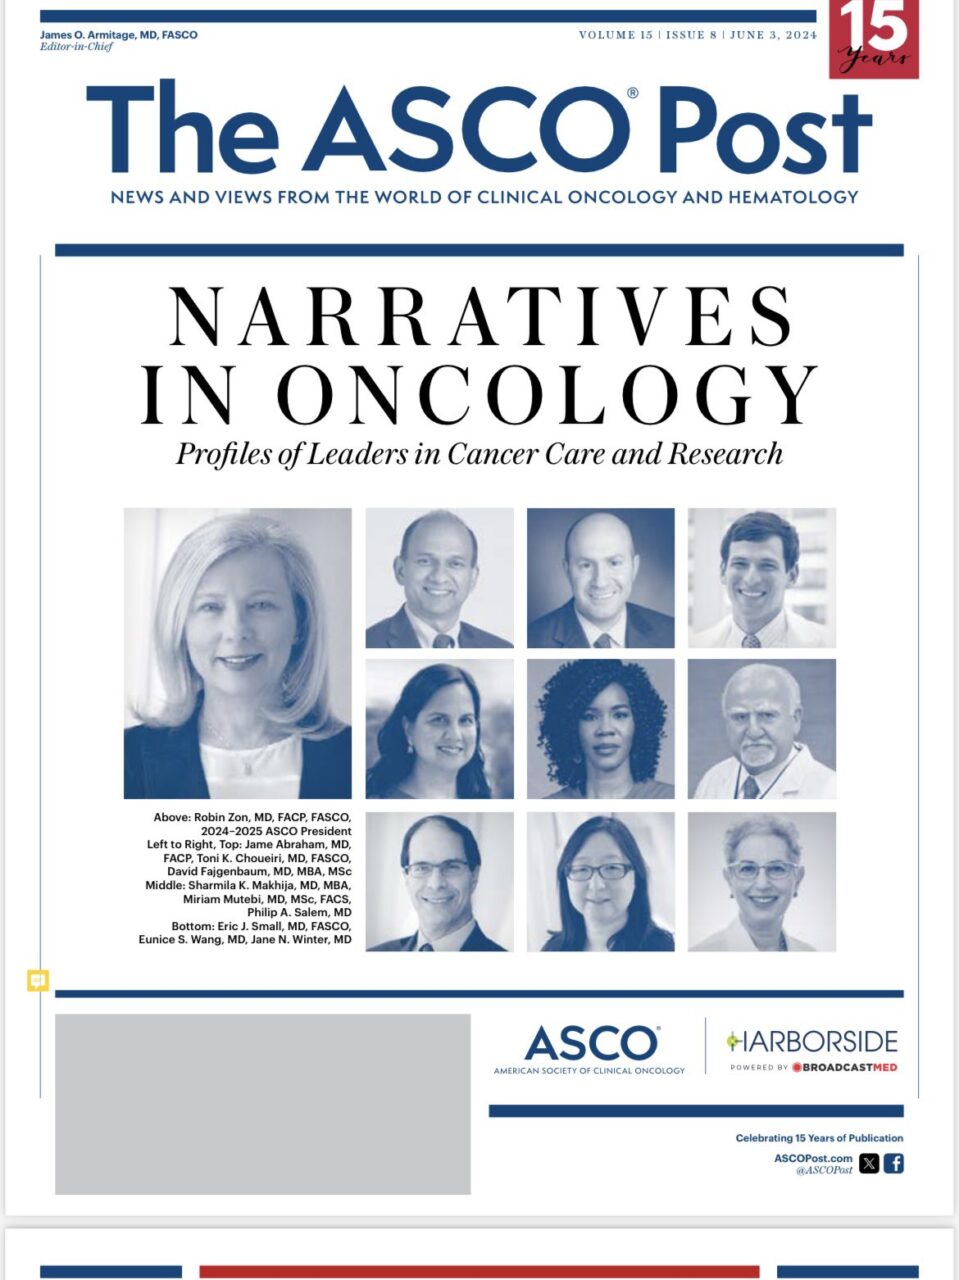 Jame Abraham: Thanks to the The ASCO Post for the write up!